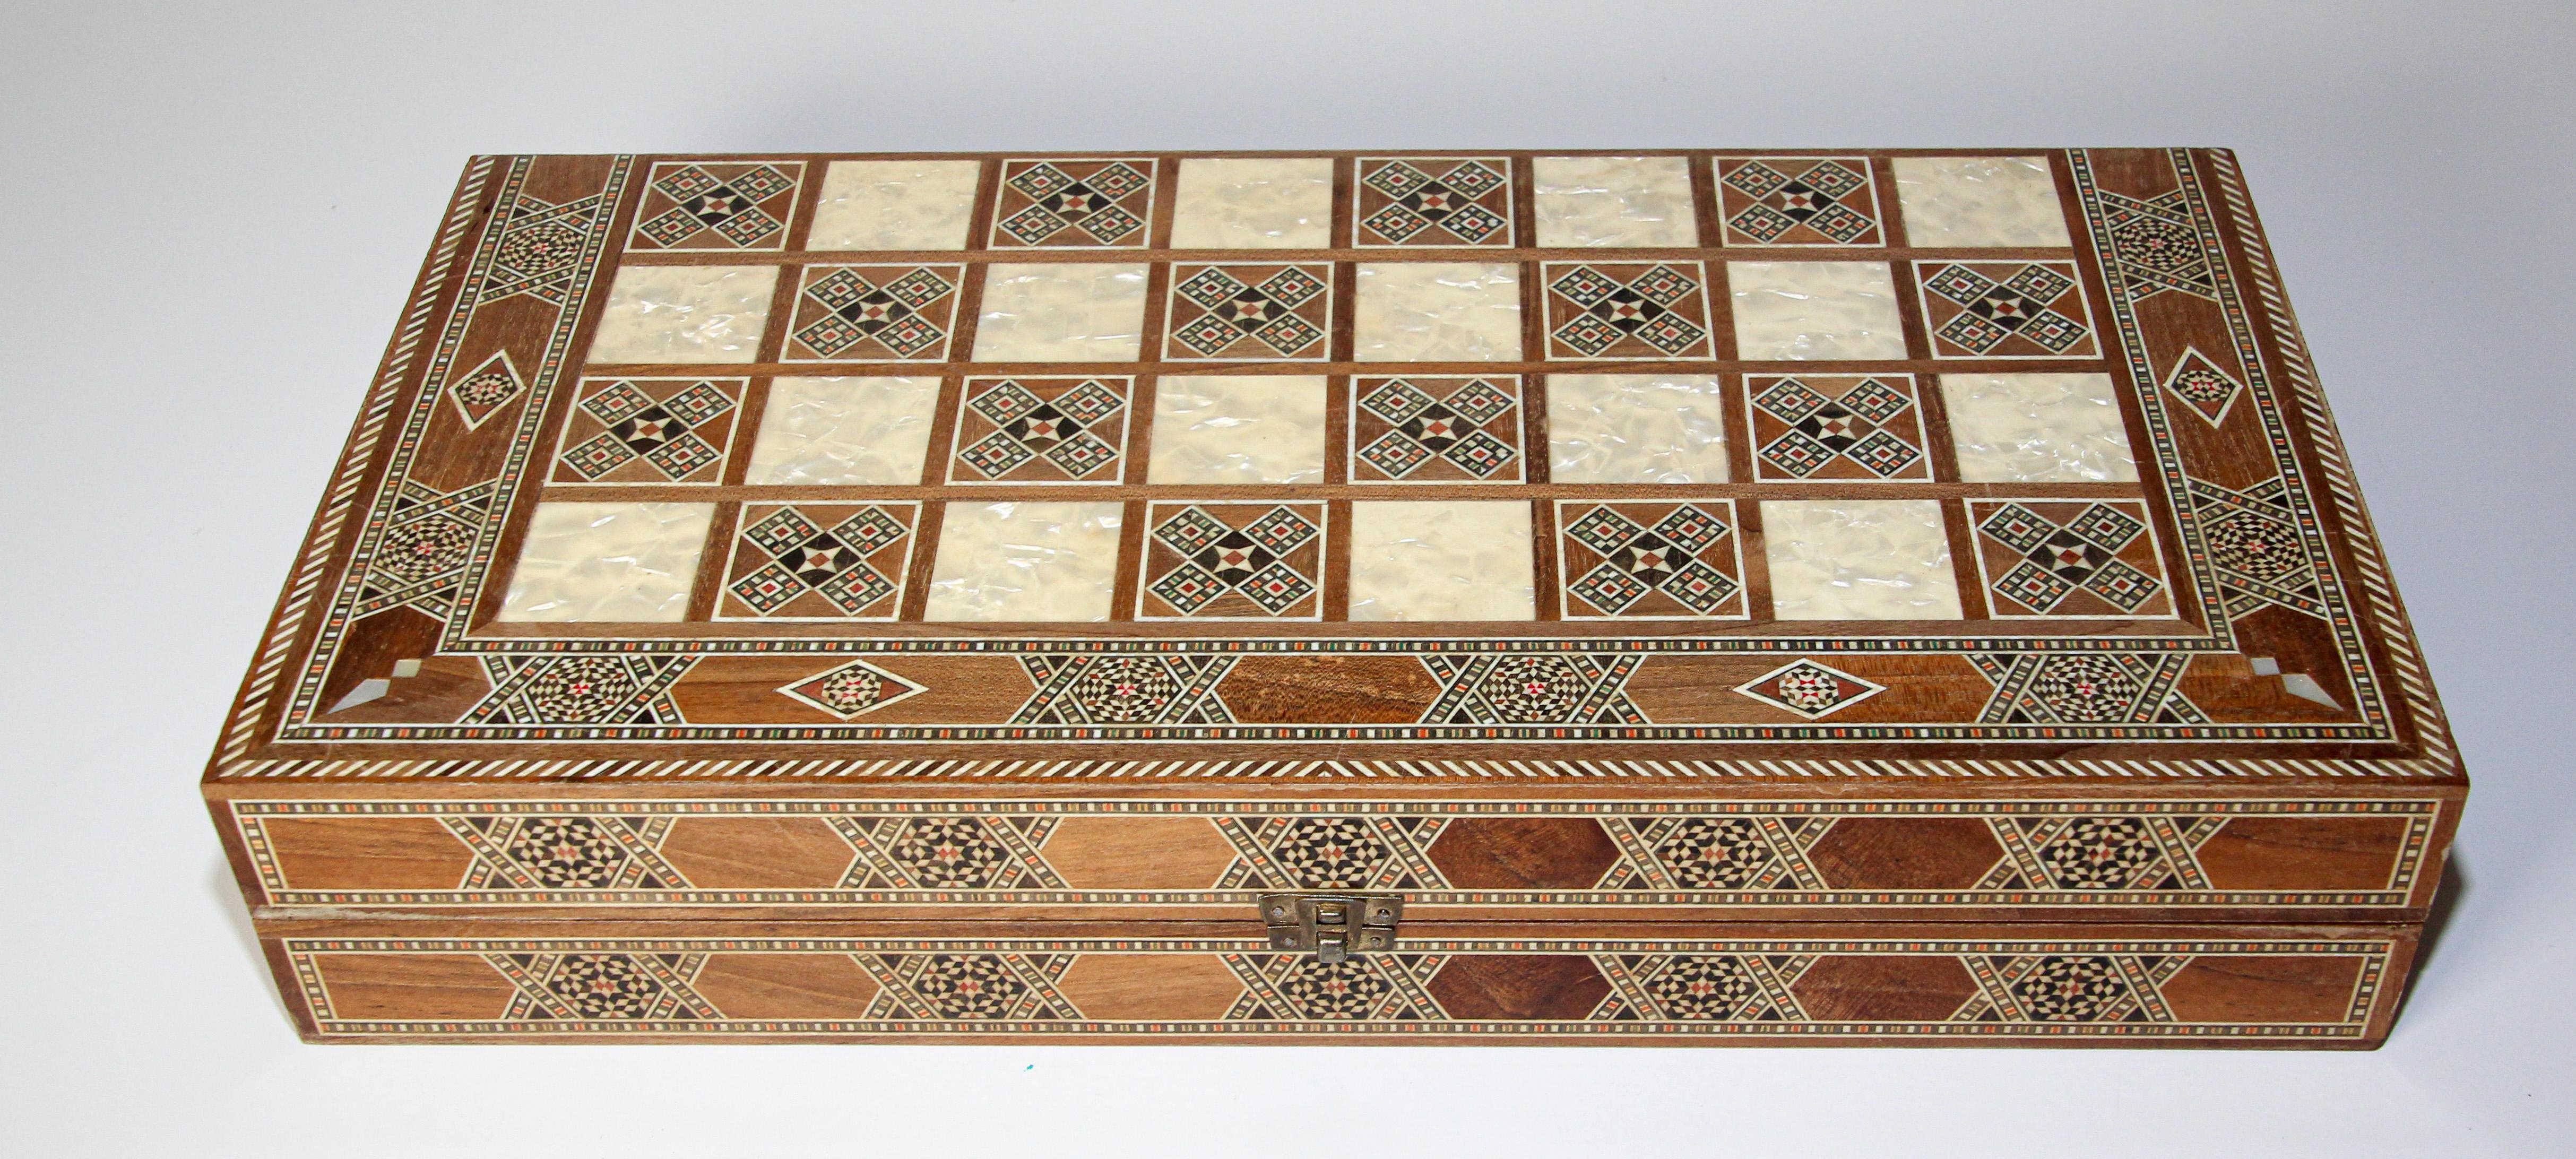 Large vintage midcentury Syrian inlaid with mother of pearl mosaic backgammon and chess game.
Great inlaid micro mosaic amarquetry game box features a chess and checker board on the exterior and backgammon board on the interior with all the wooden